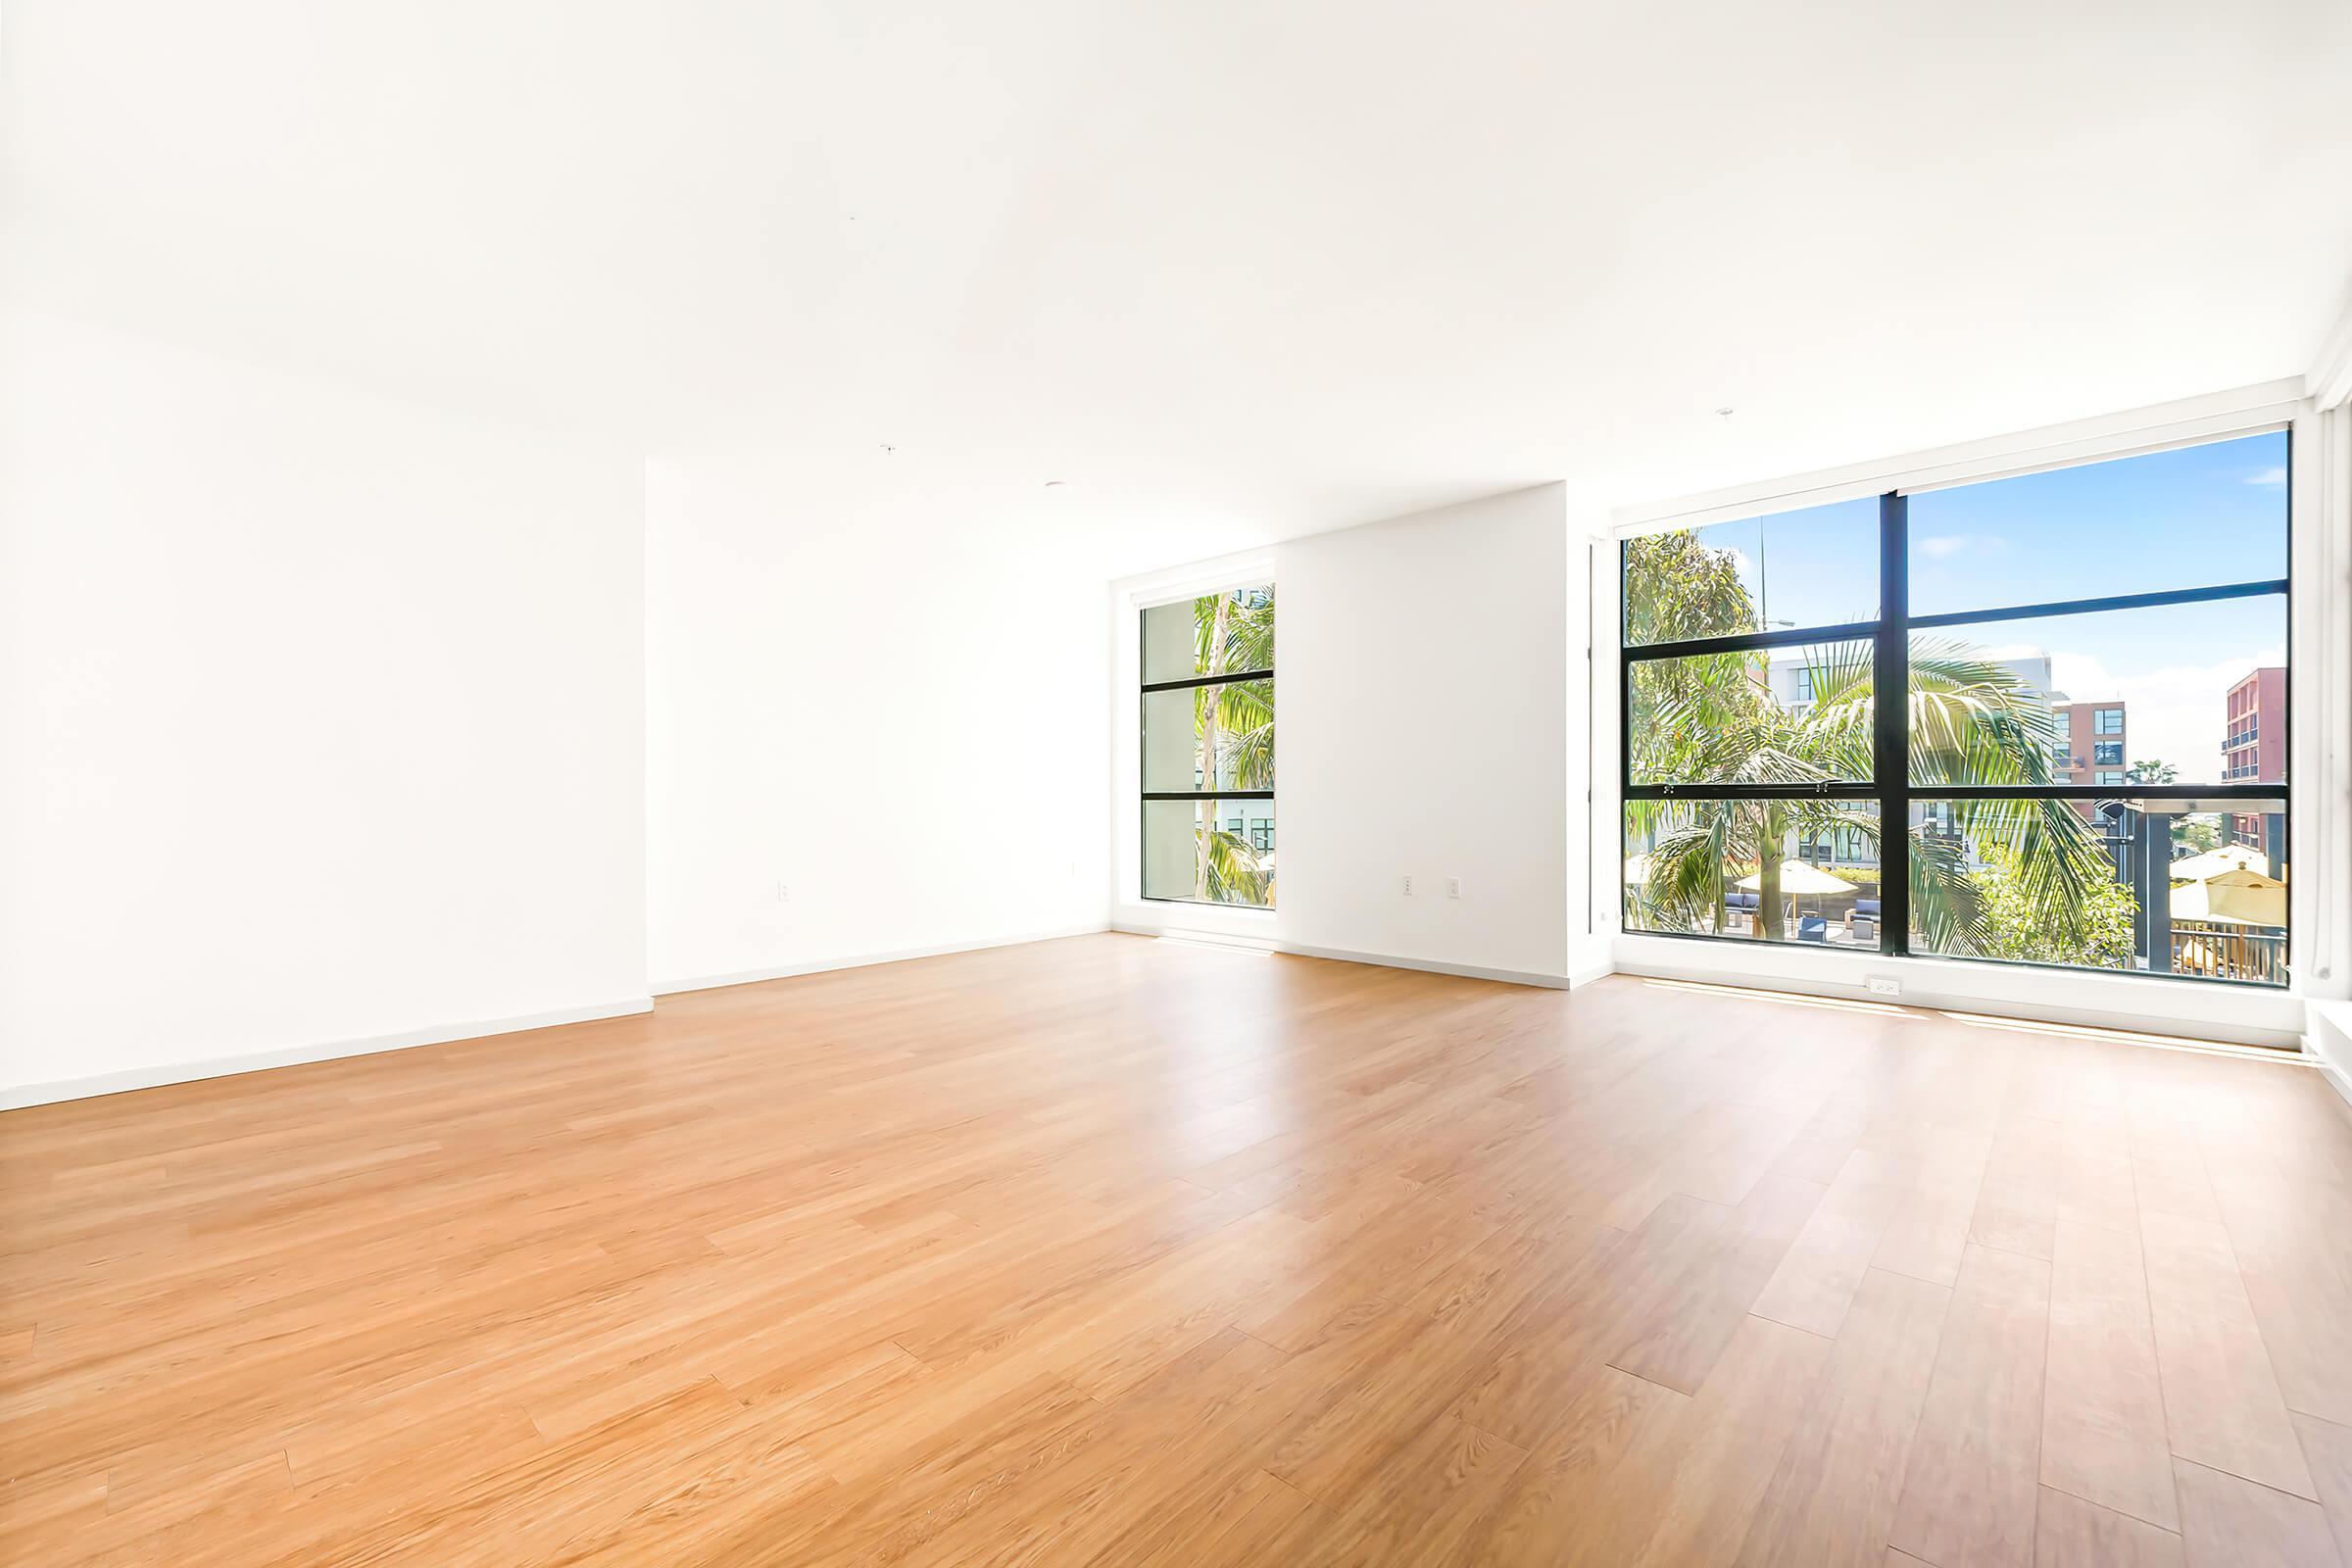 vacant living room with large paned windows